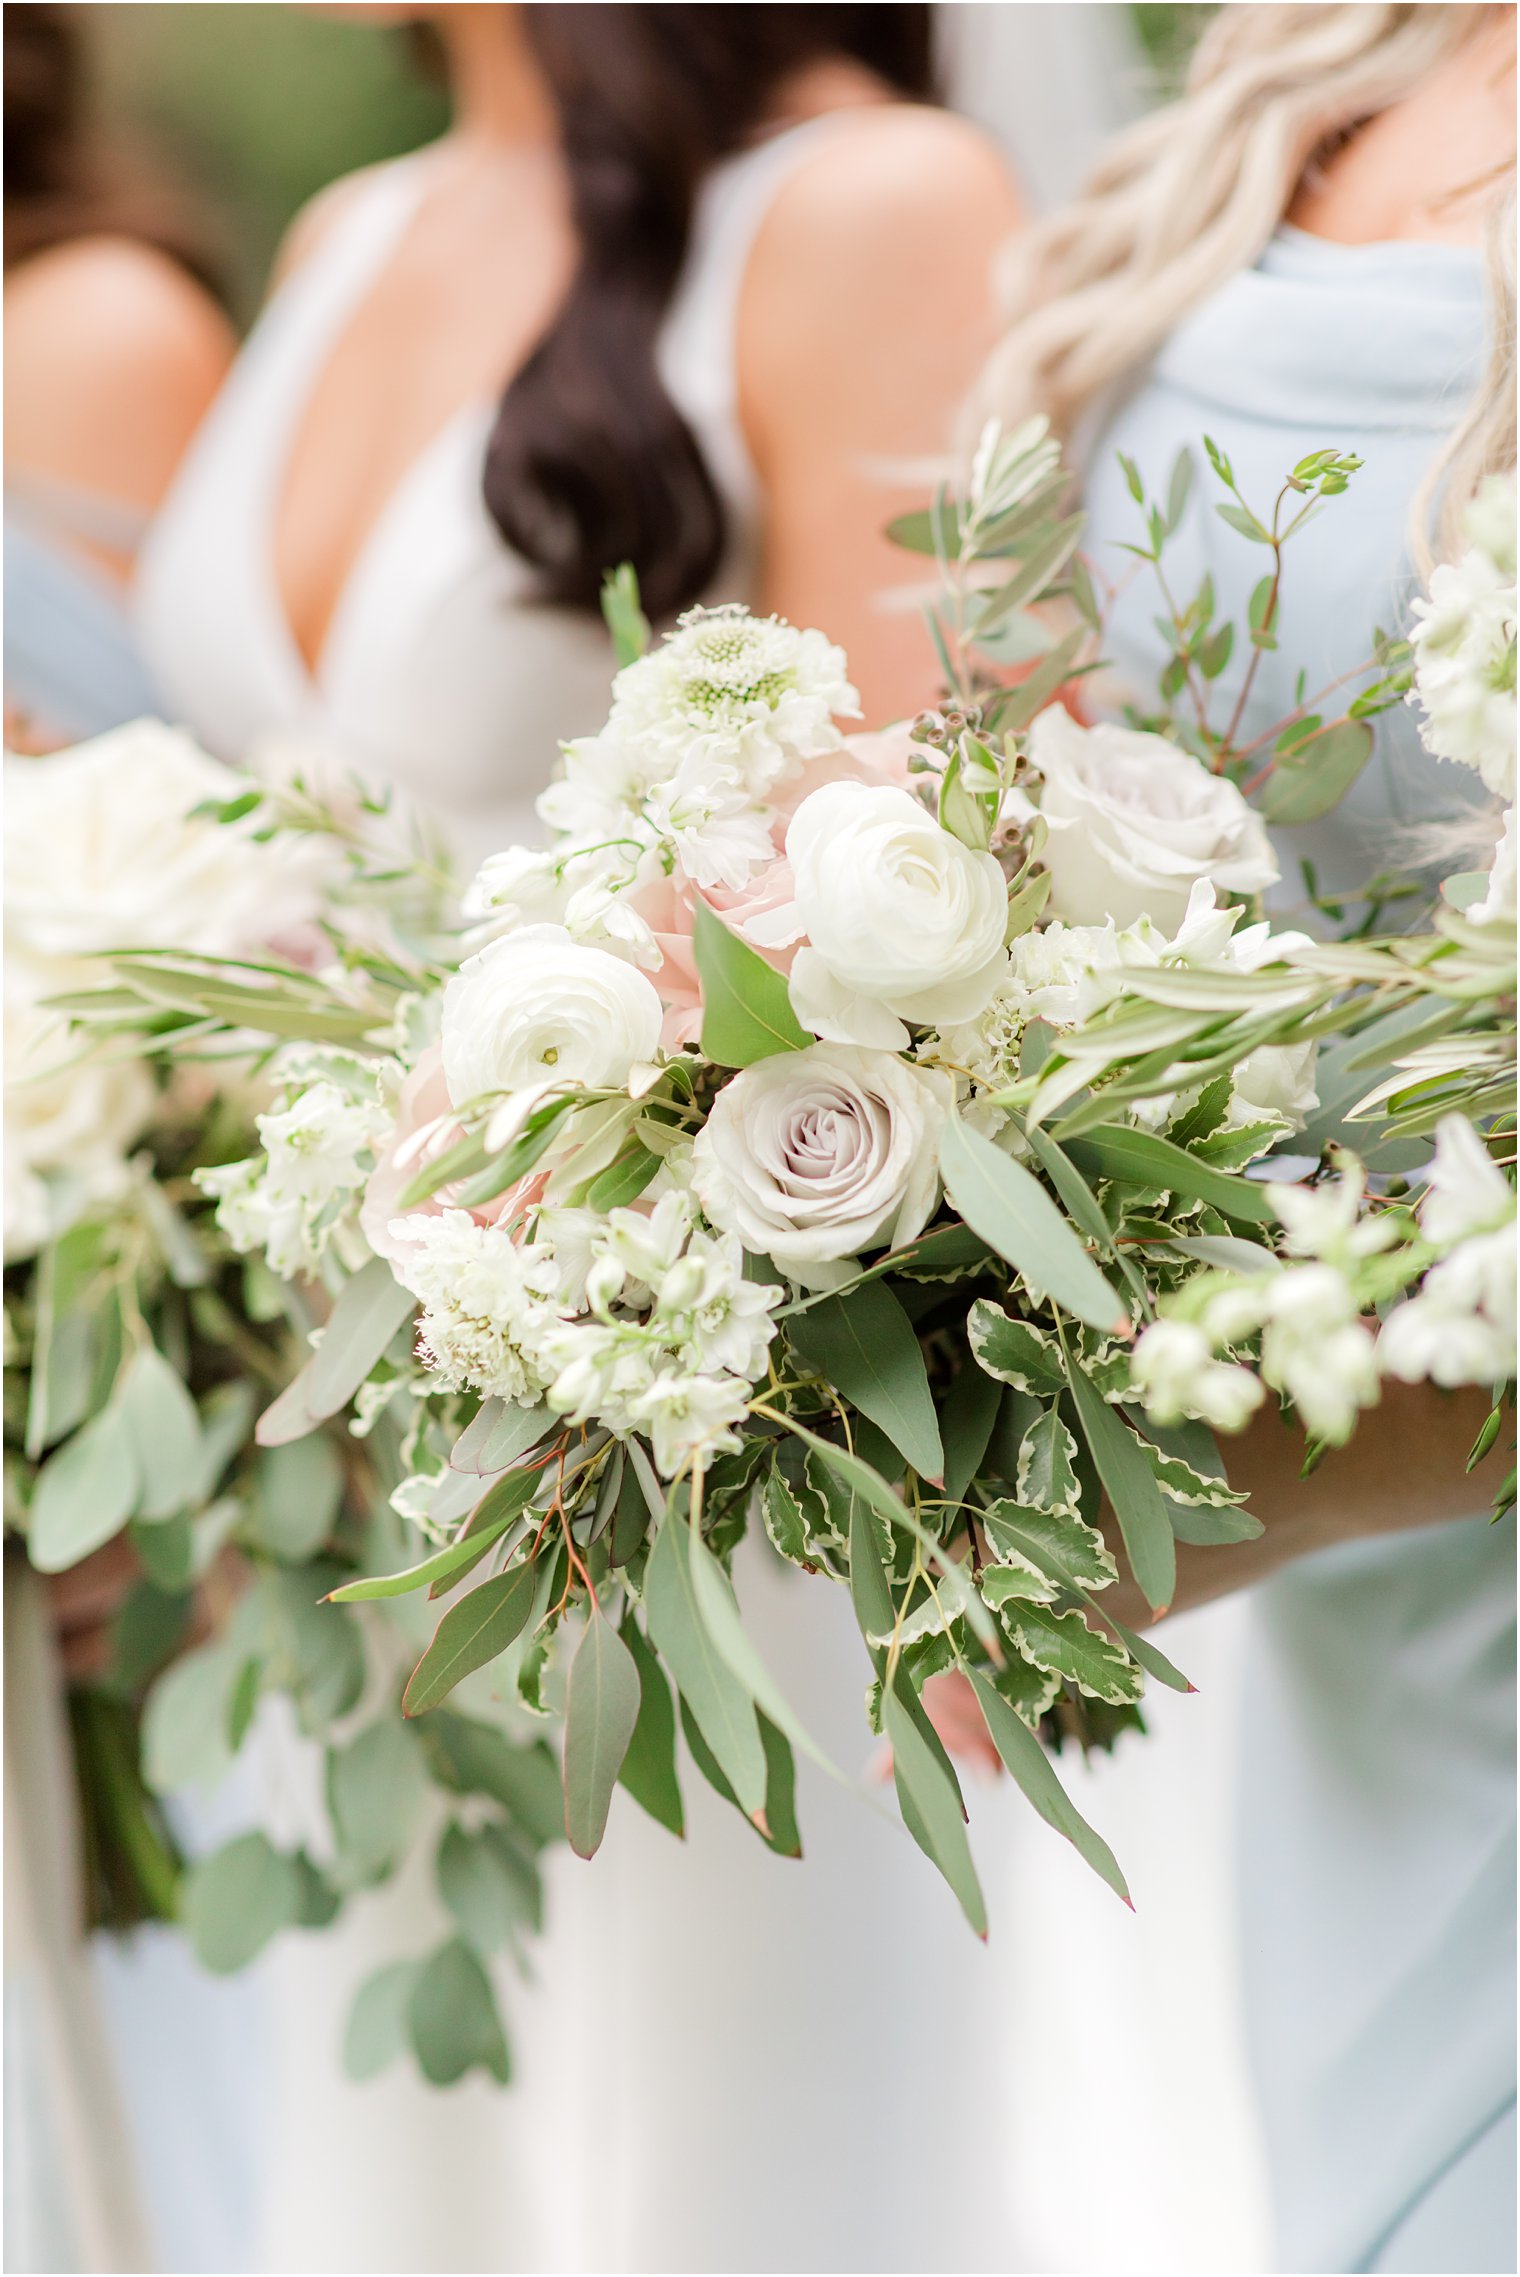 organic style bouquets by Crossed Keys Designs